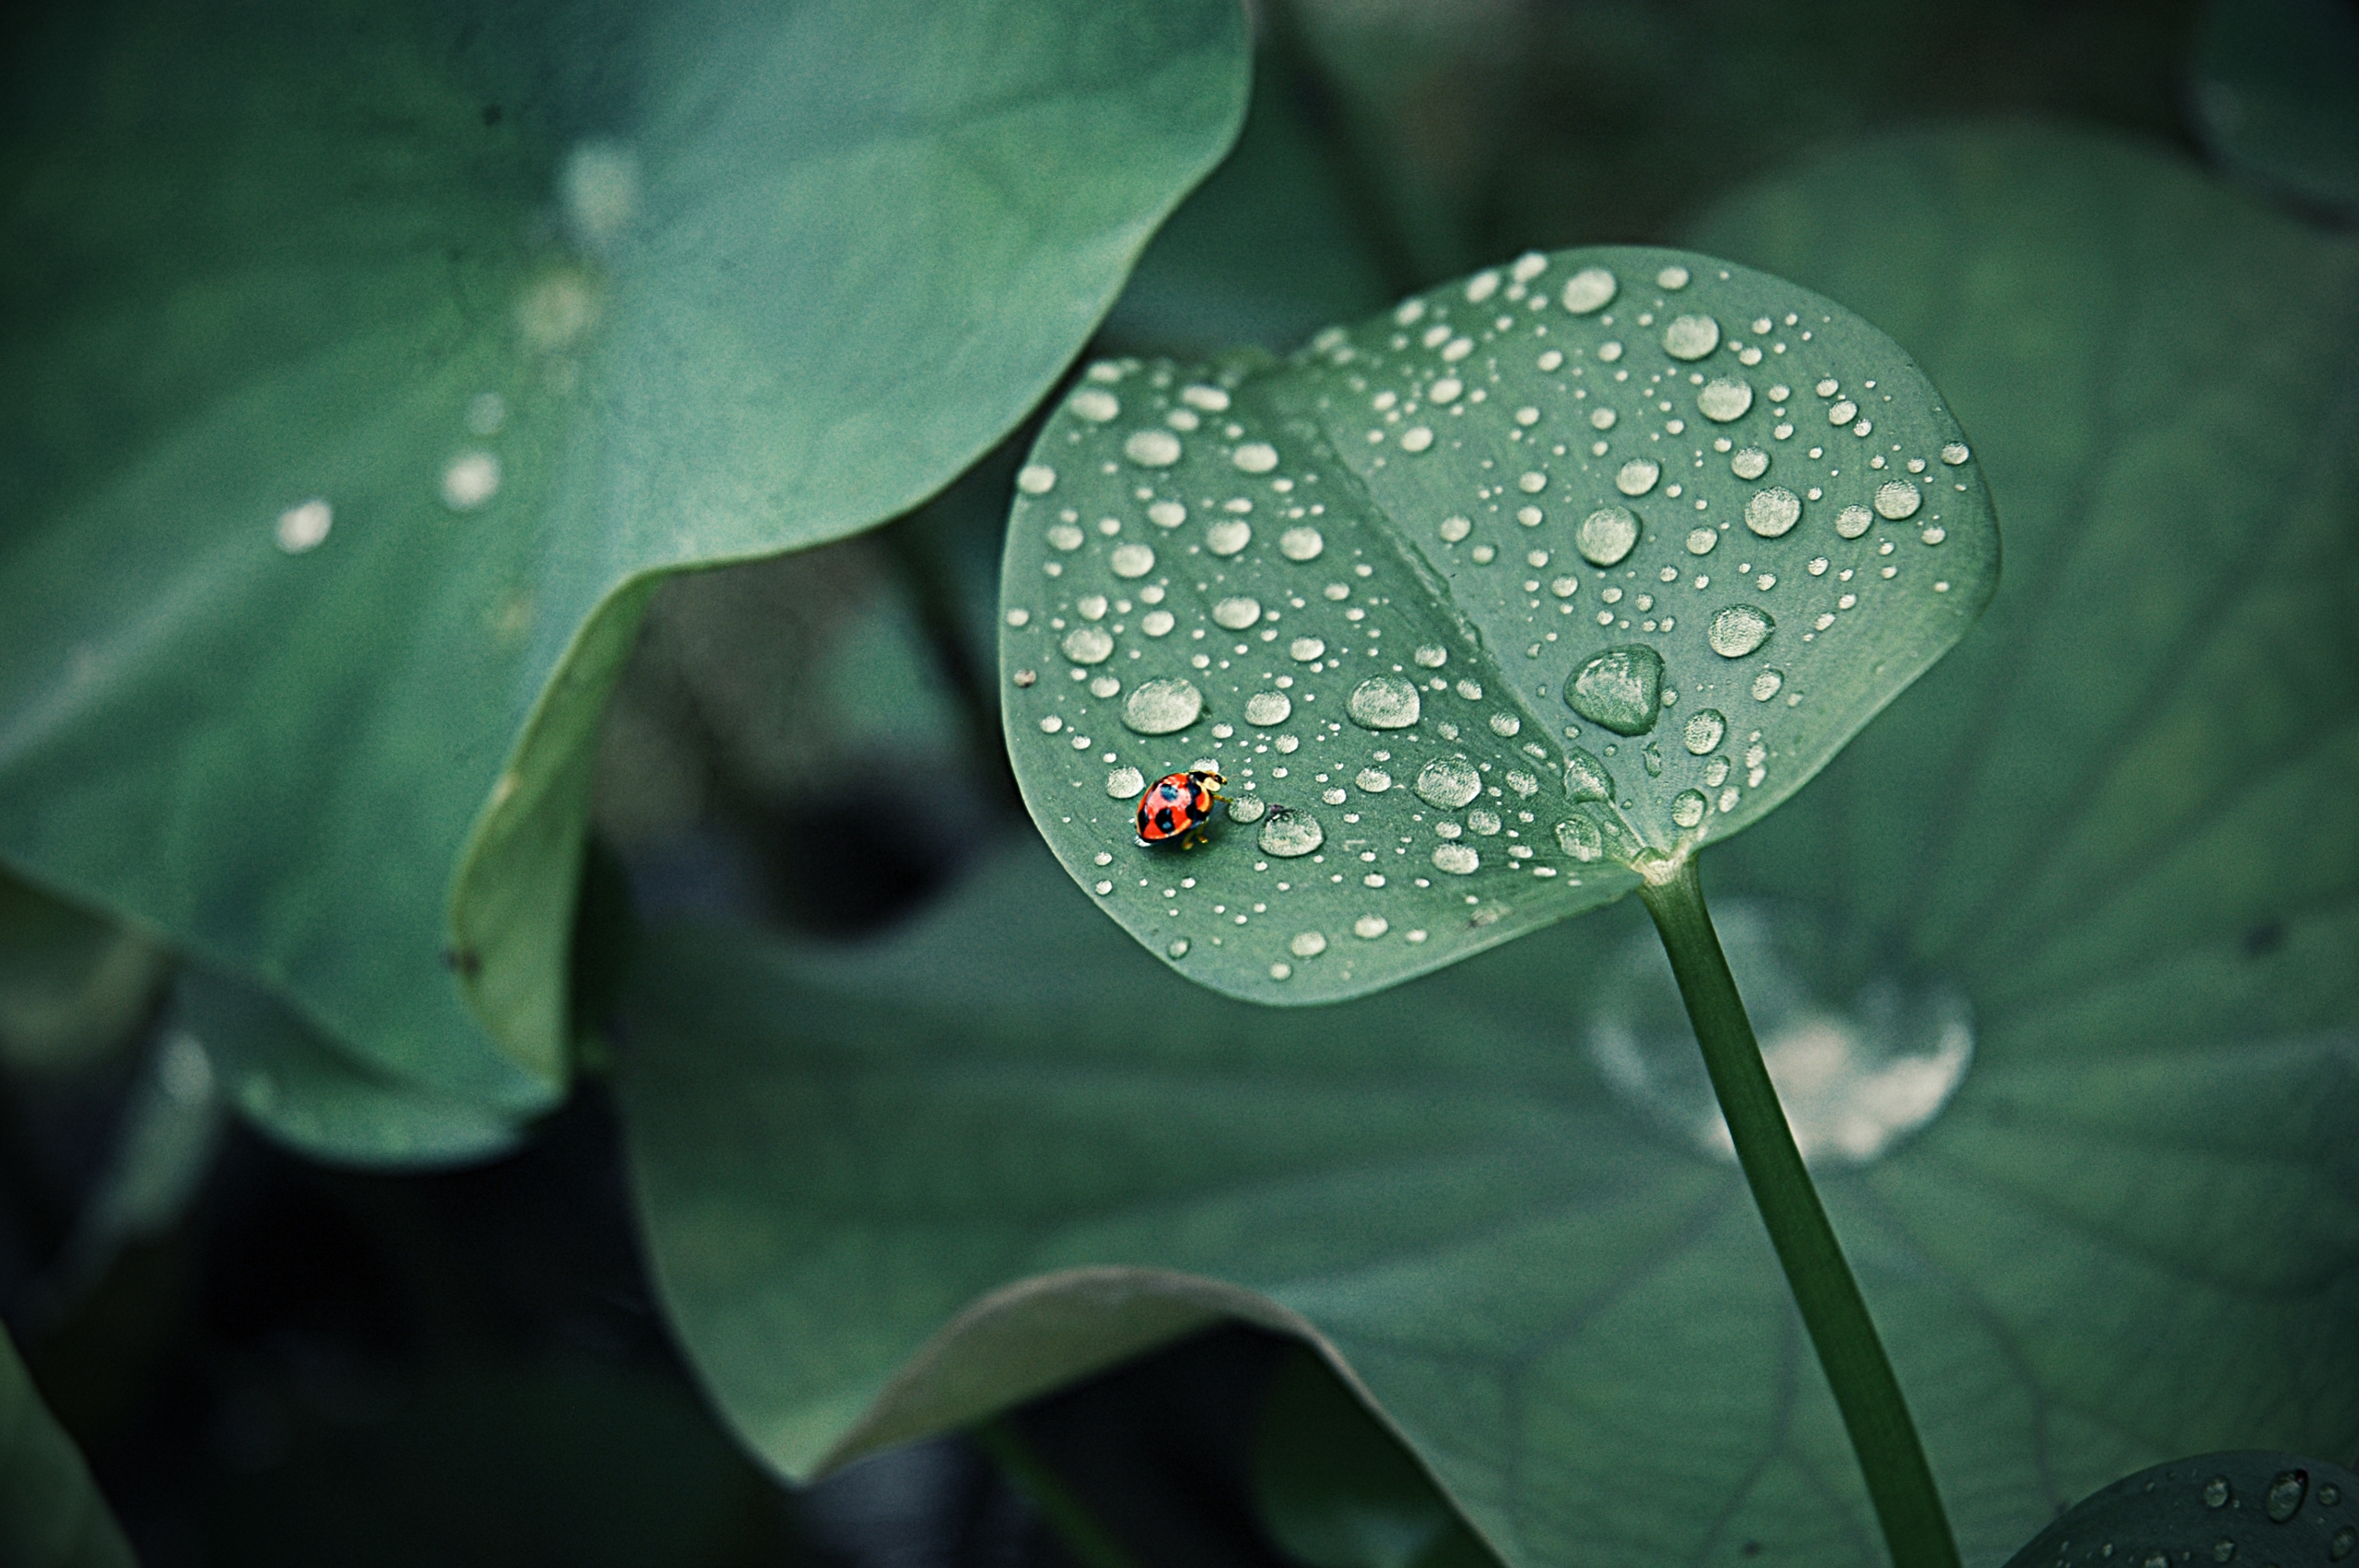 drops, leaves, macro, insect, round, ladybug, ladybird, dew High Definition image